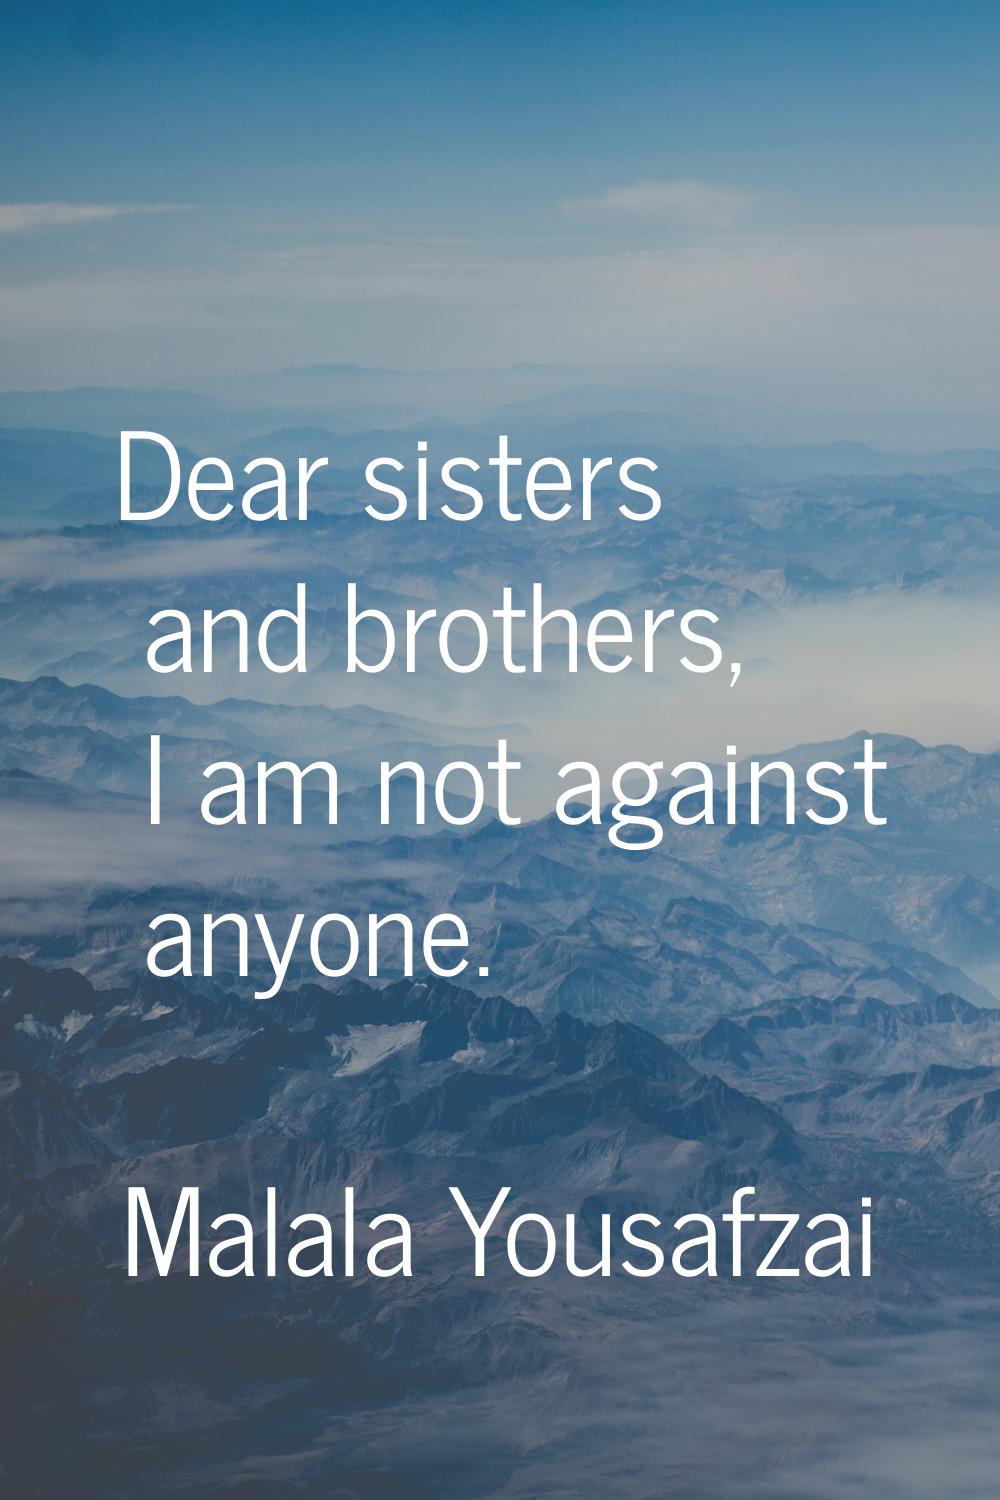 Dear sisters and brothers, I am not against anyone.